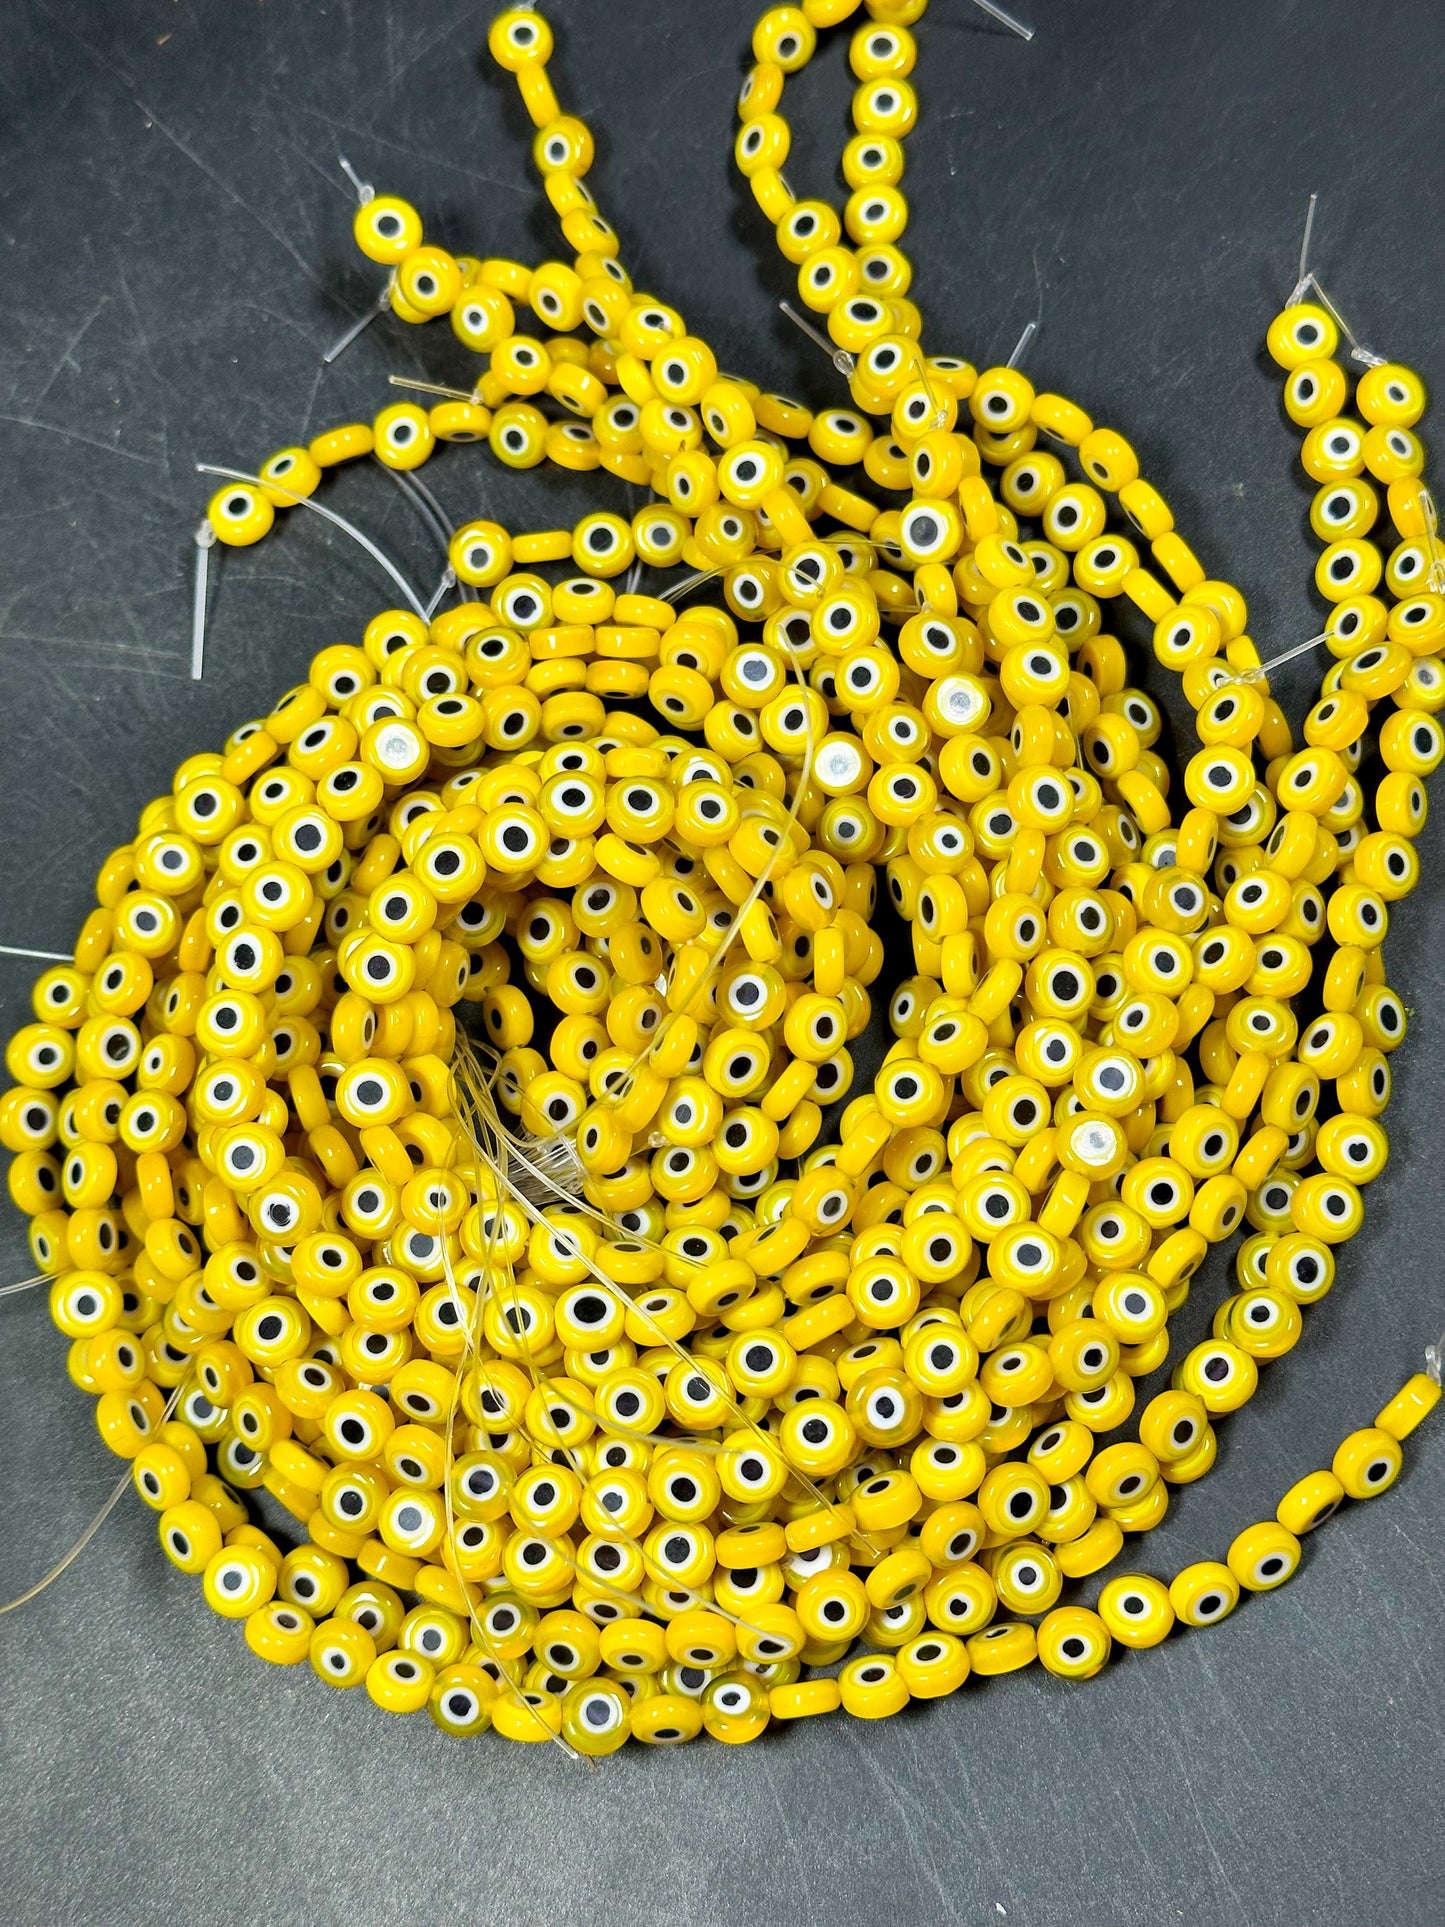 Beautiful Evil Eye Glass Beads 8mm Flat Coin Shape, Beautiful Yellow Color Evil Eye Beads, Religious Amulet Prayer Beads, Great Quality Bead